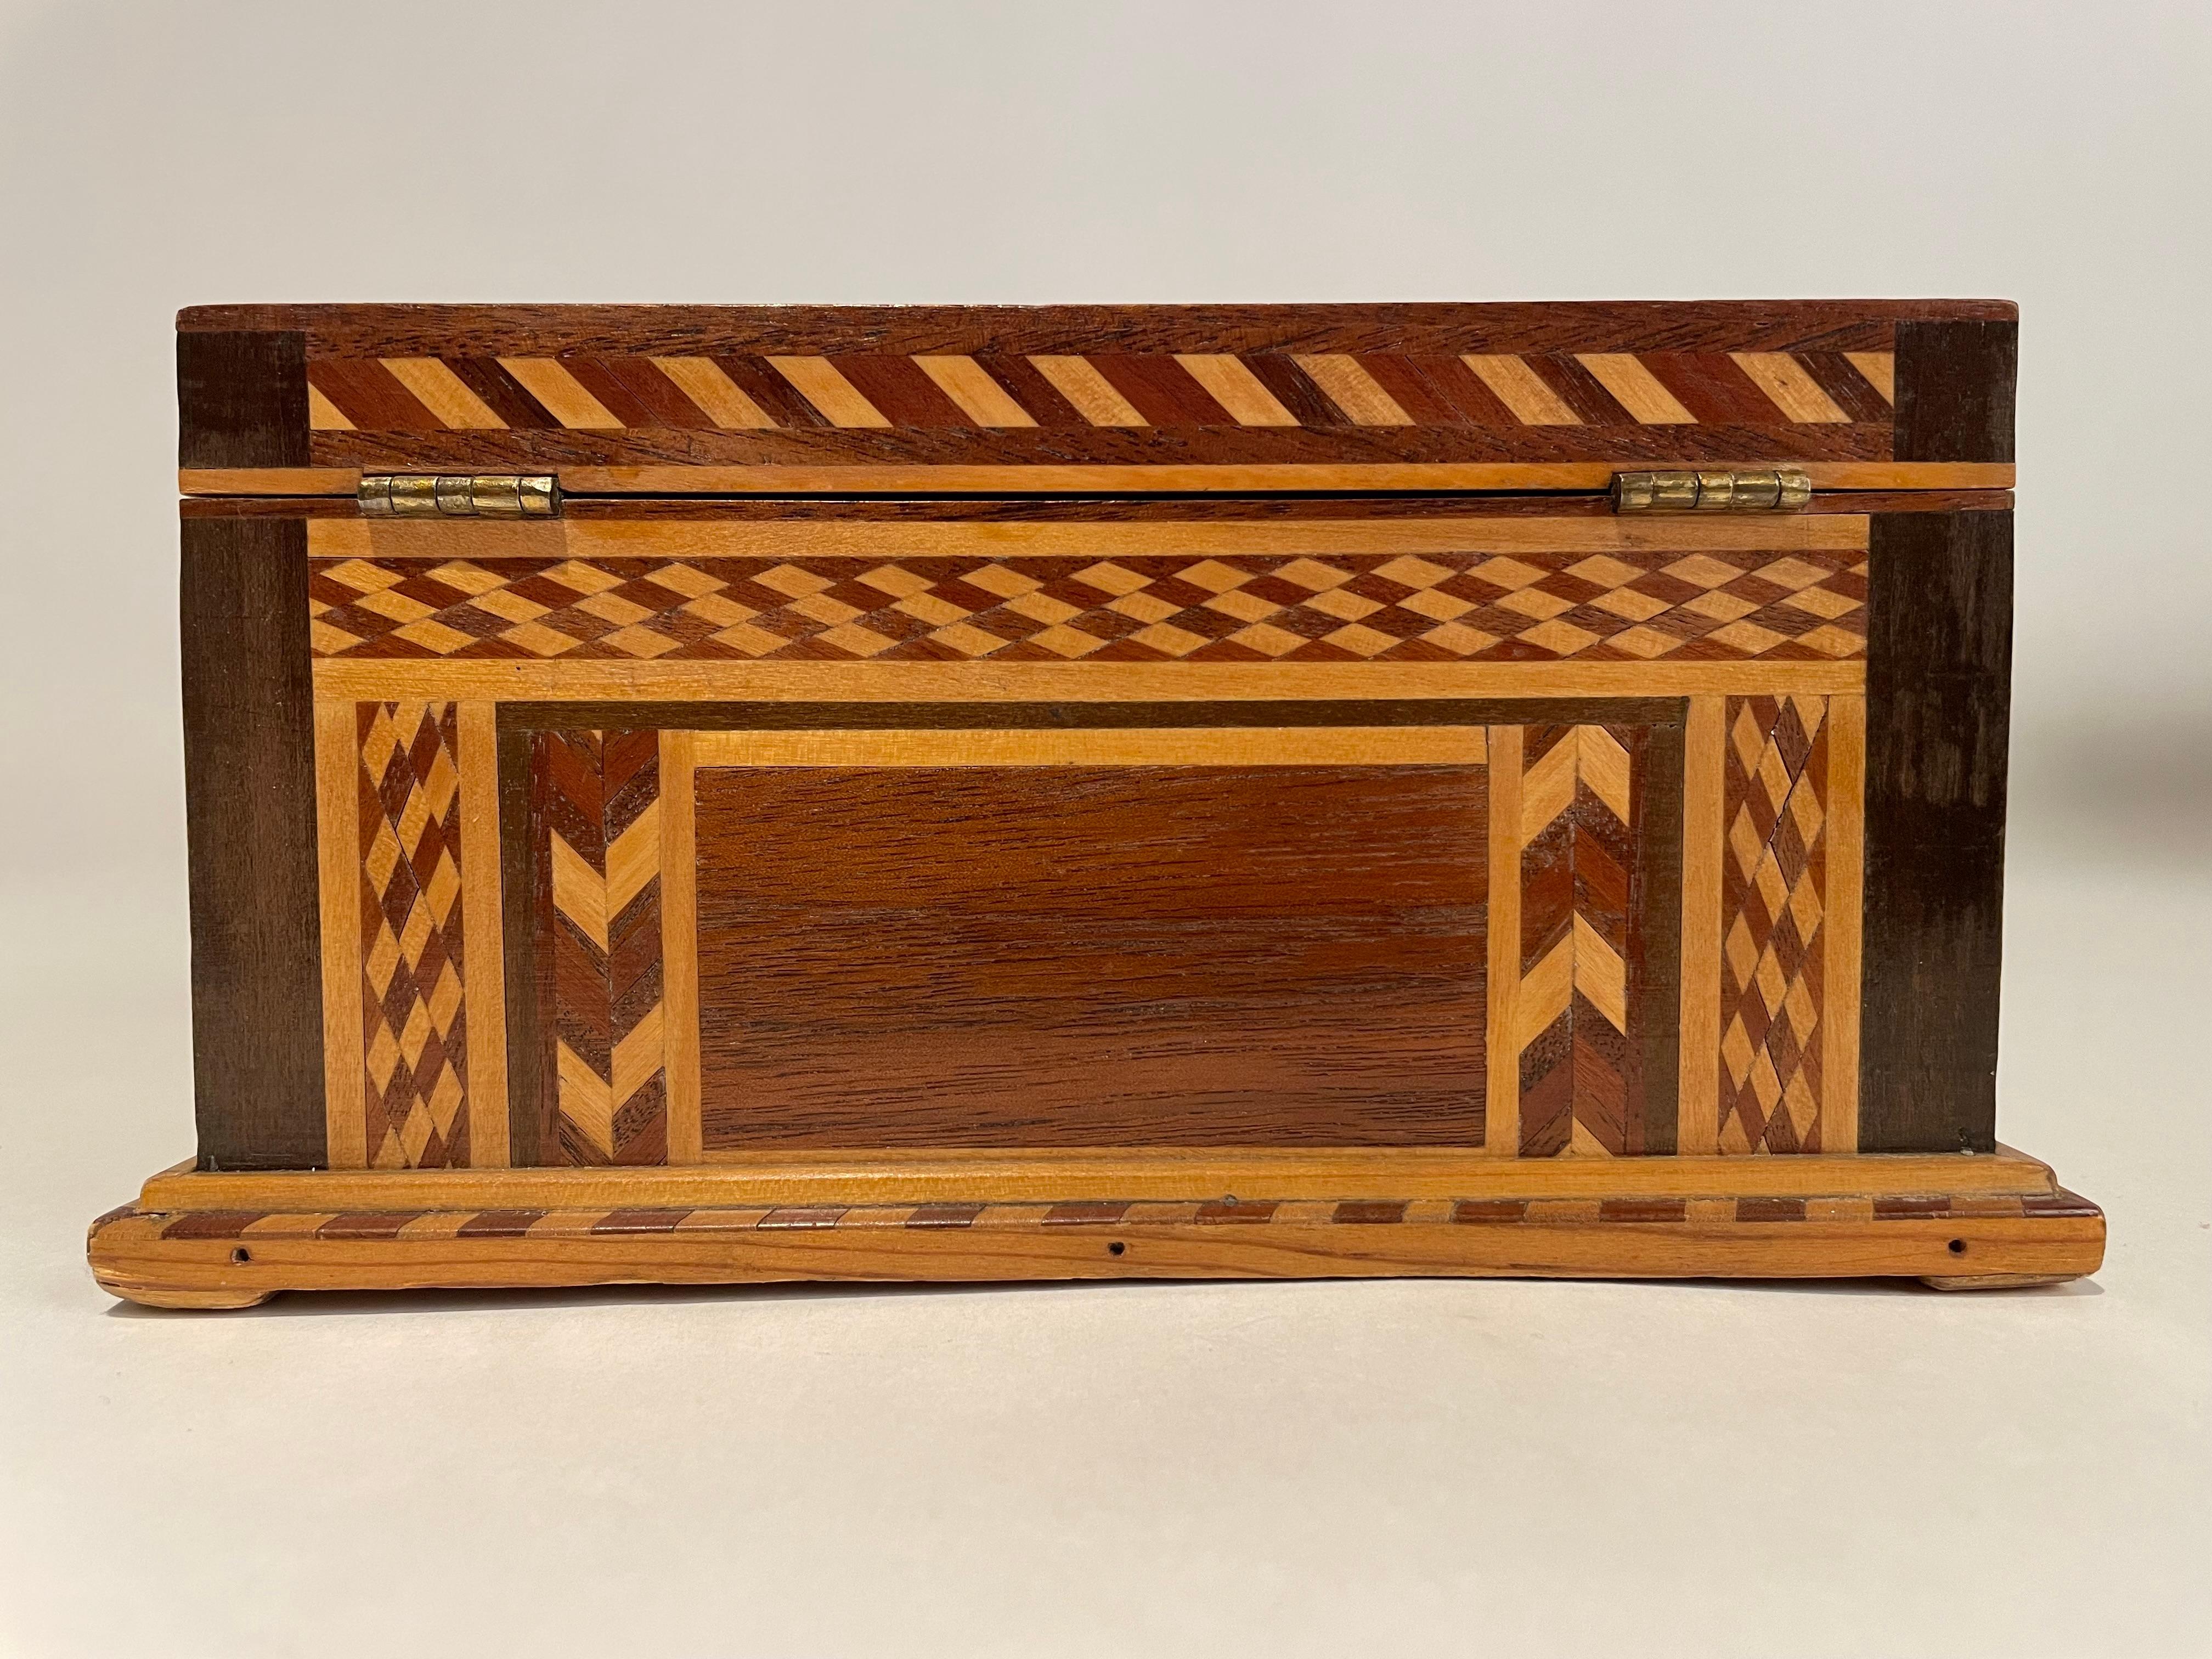 19th C American Walnut Box With Geometric And Starburst Fruitwood Inlay 1